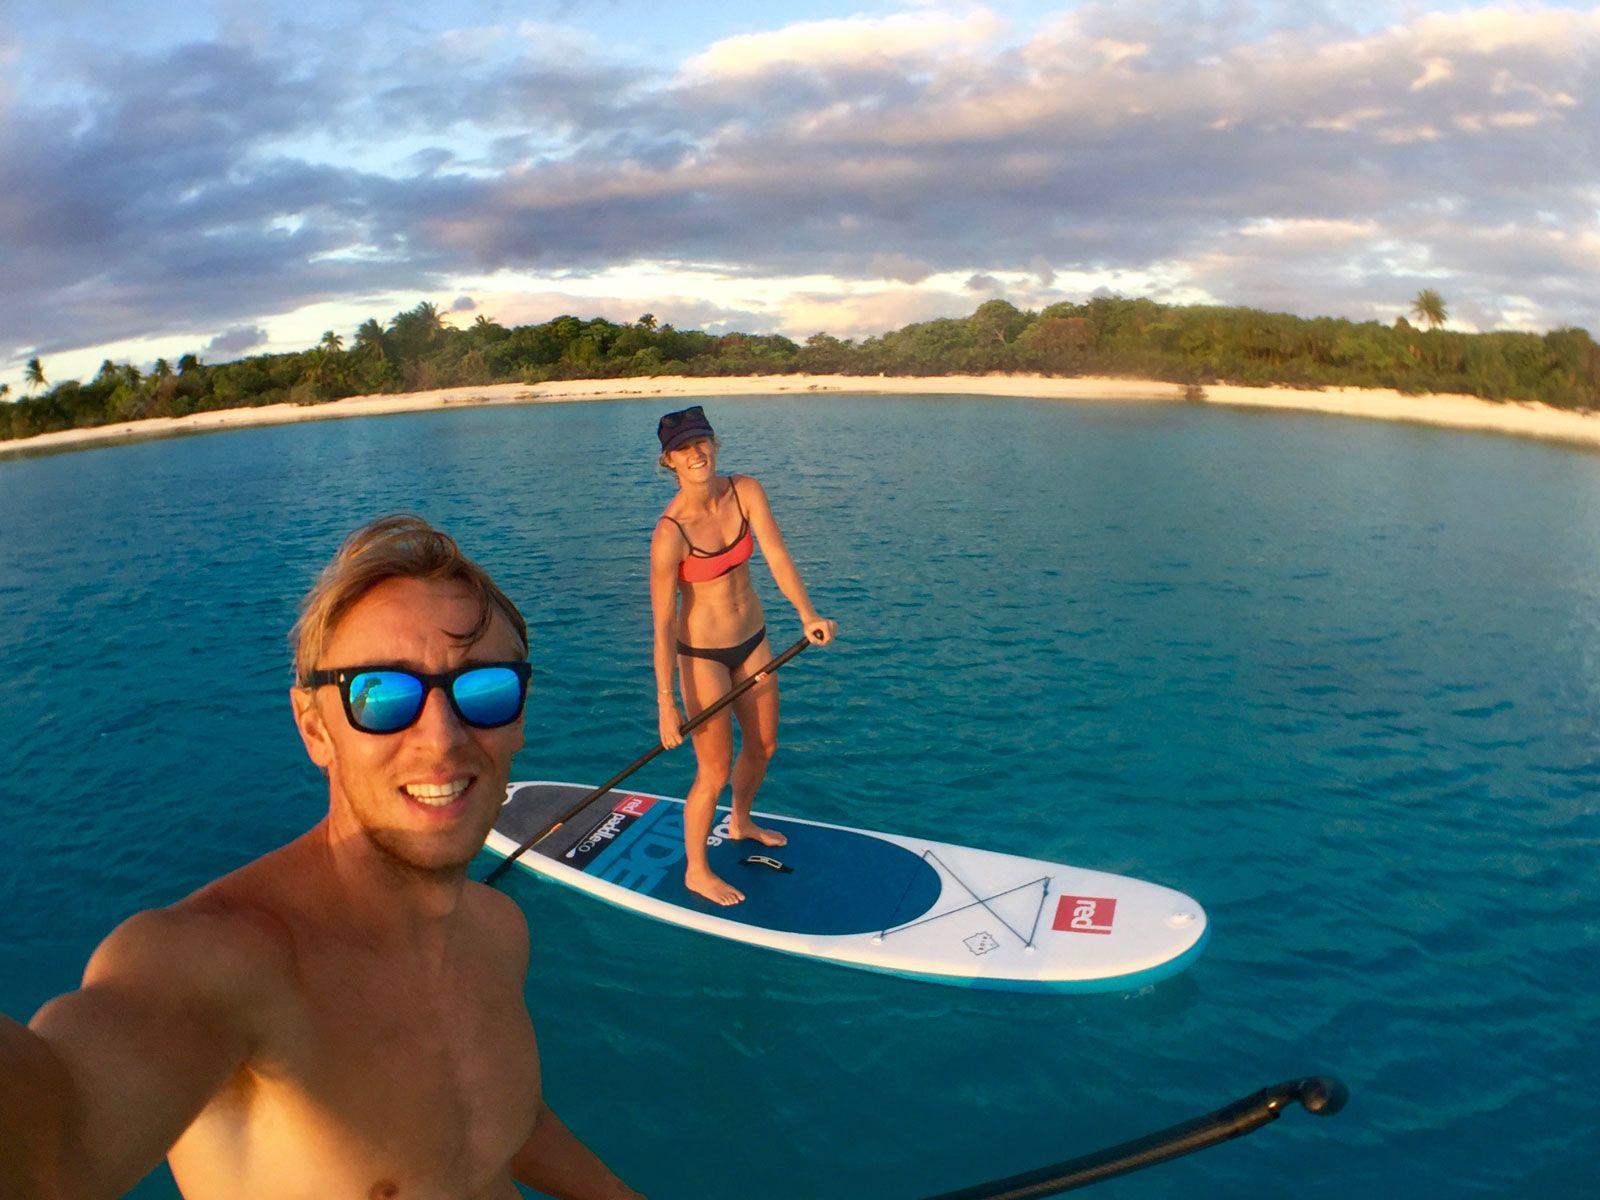 Adventures by SUP & Sail paddle boards in the Pacific Ocean